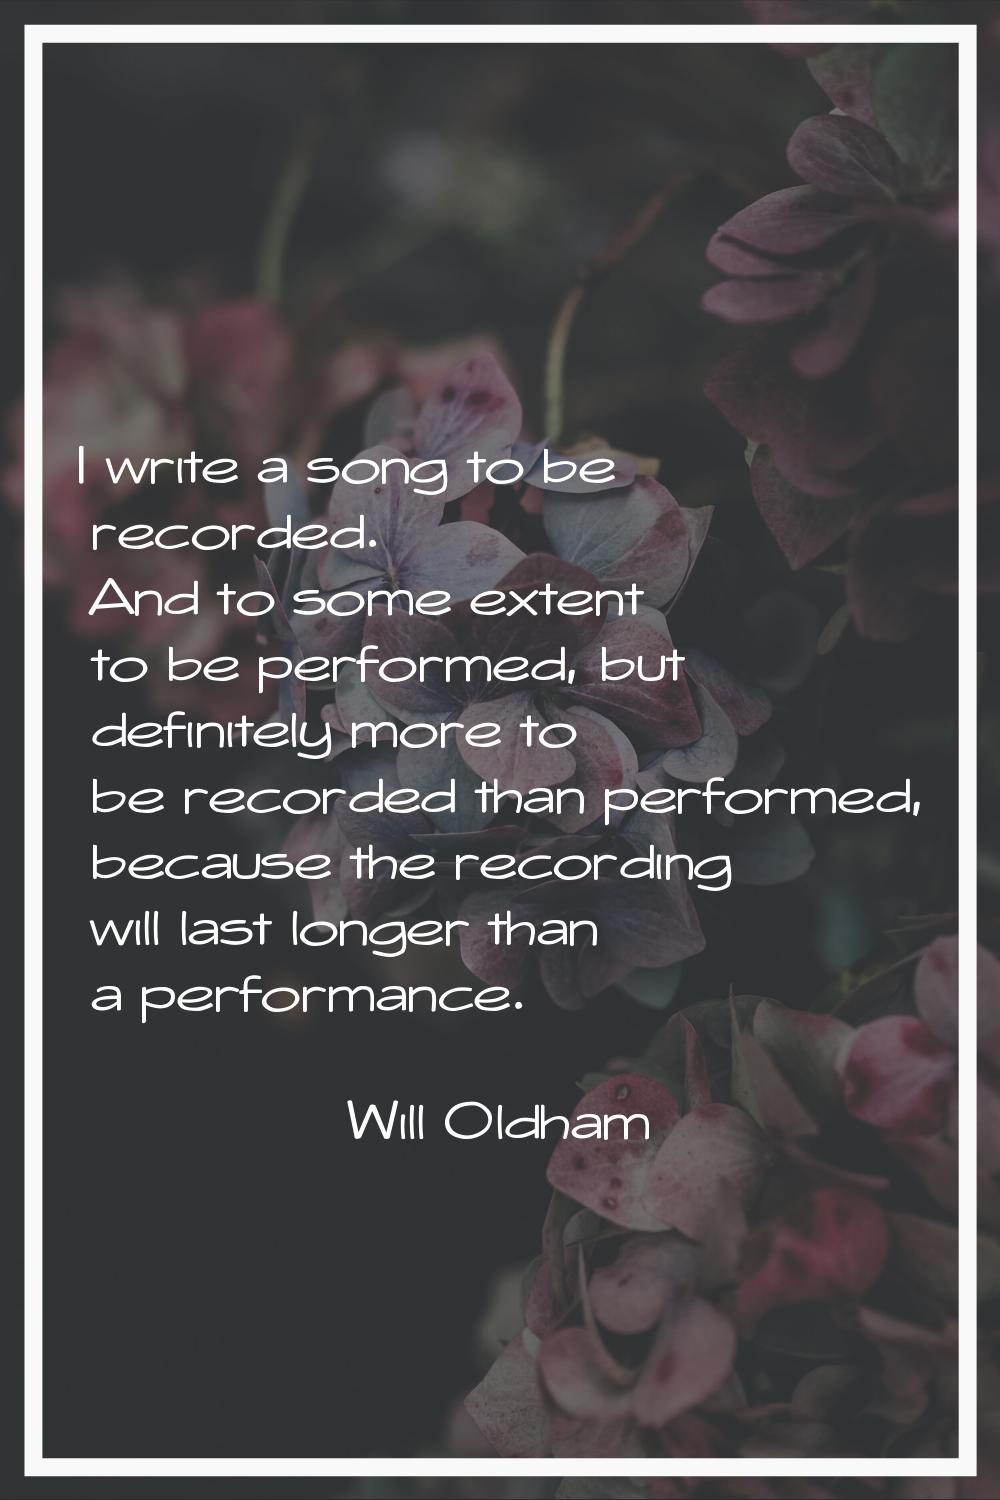 I write a song to be recorded. And to some extent to be performed, but definitely more to be record